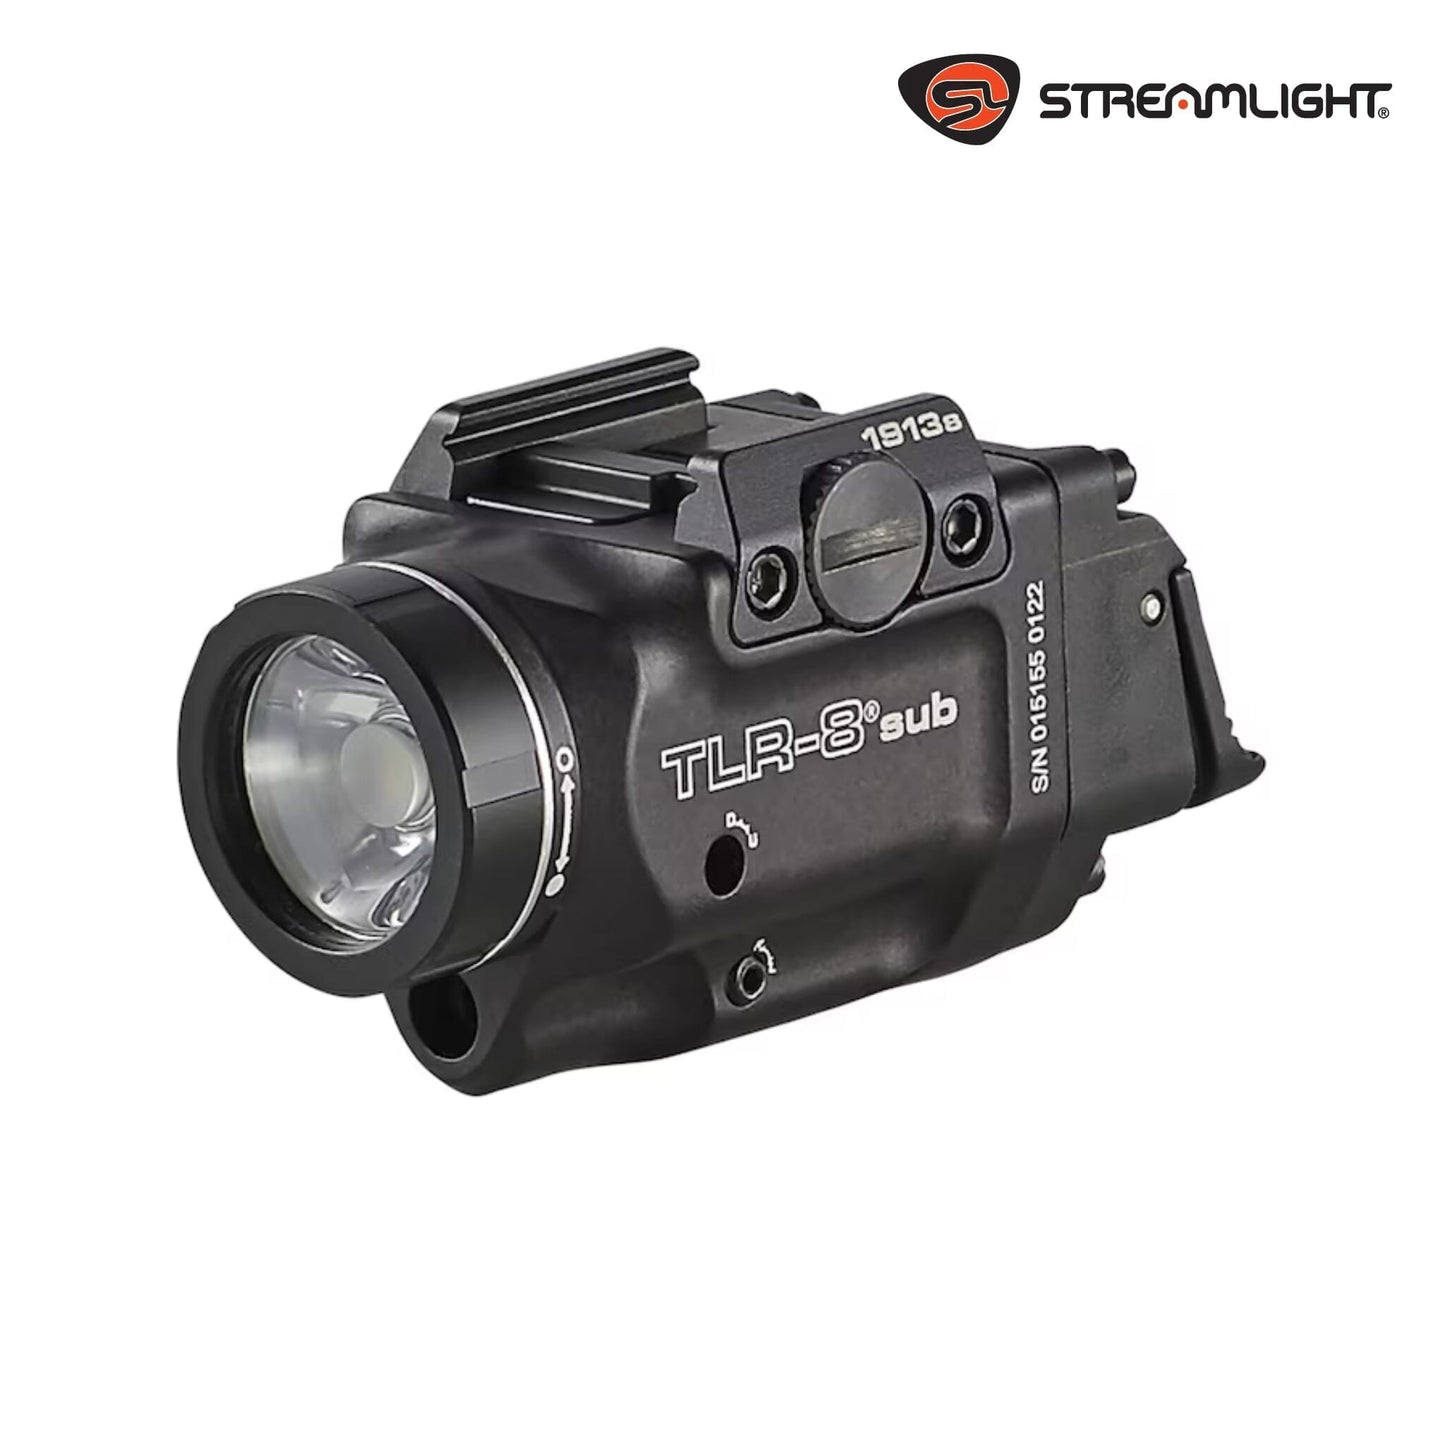 Streamlight TLR-8 Sub Weapon Light with Laser Weapon Light Streamlight 